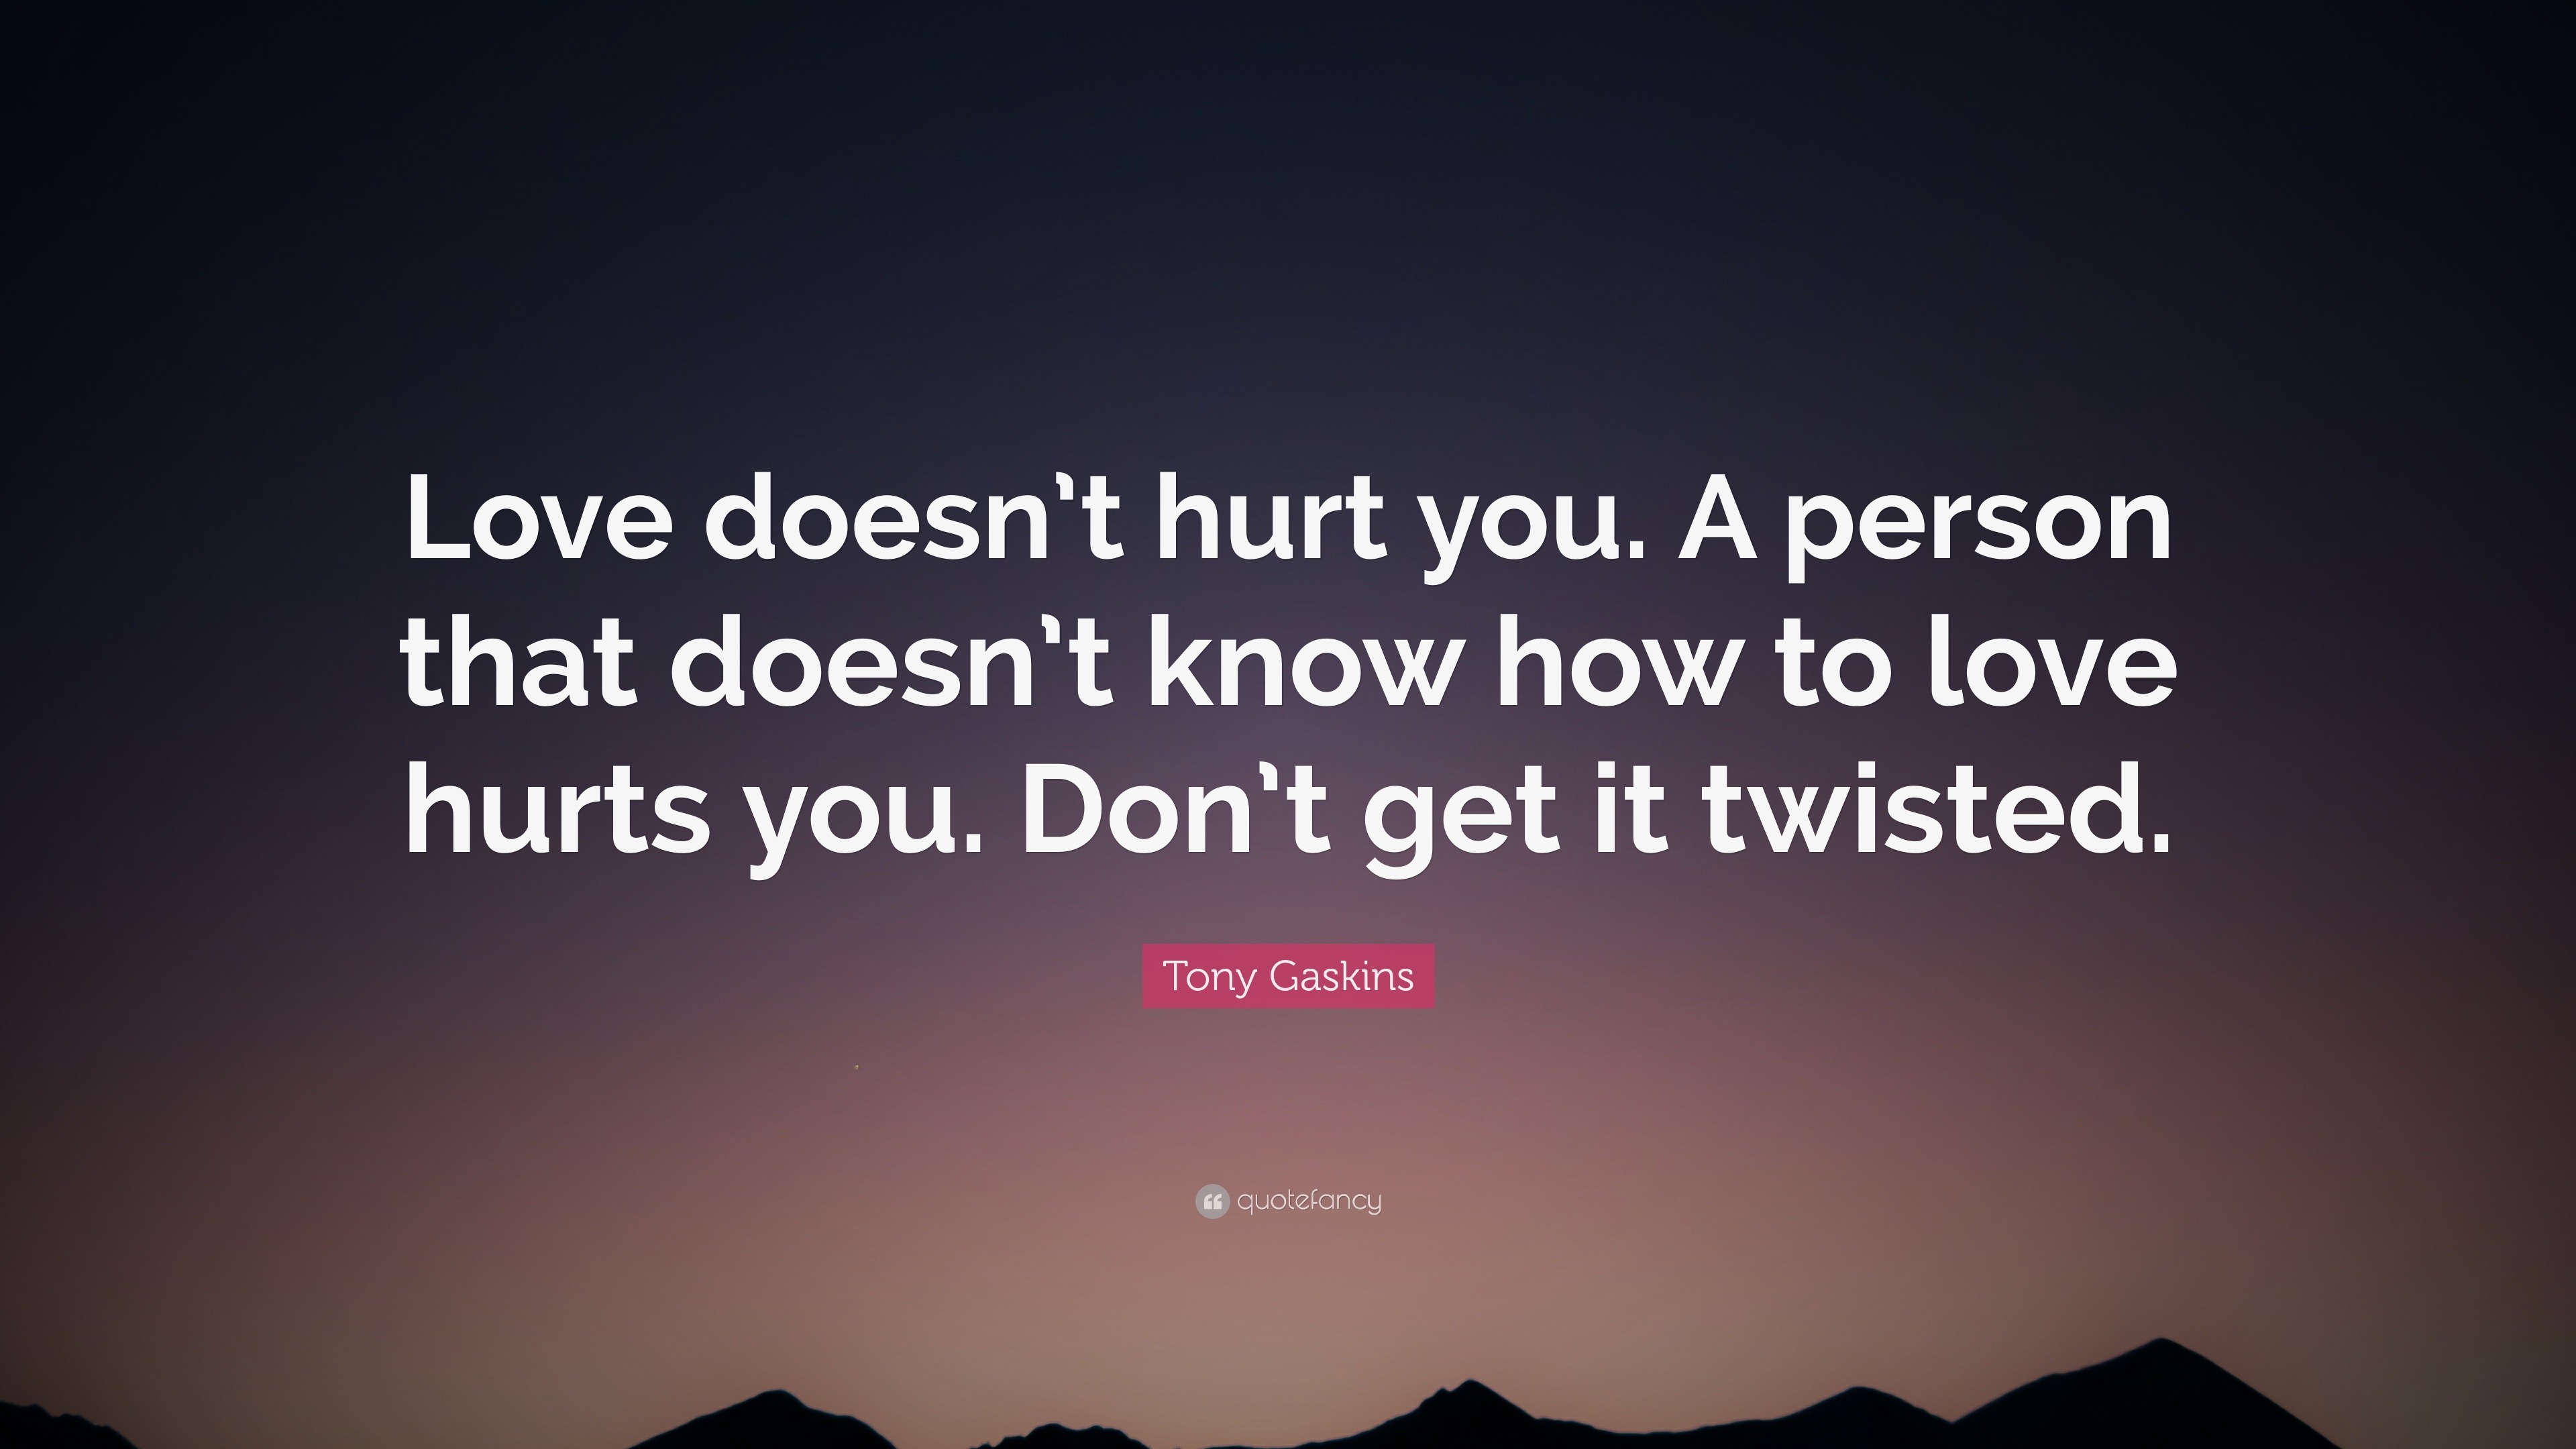 Tony Gaskins Quote “Love doesn t hurt you A person that doesn